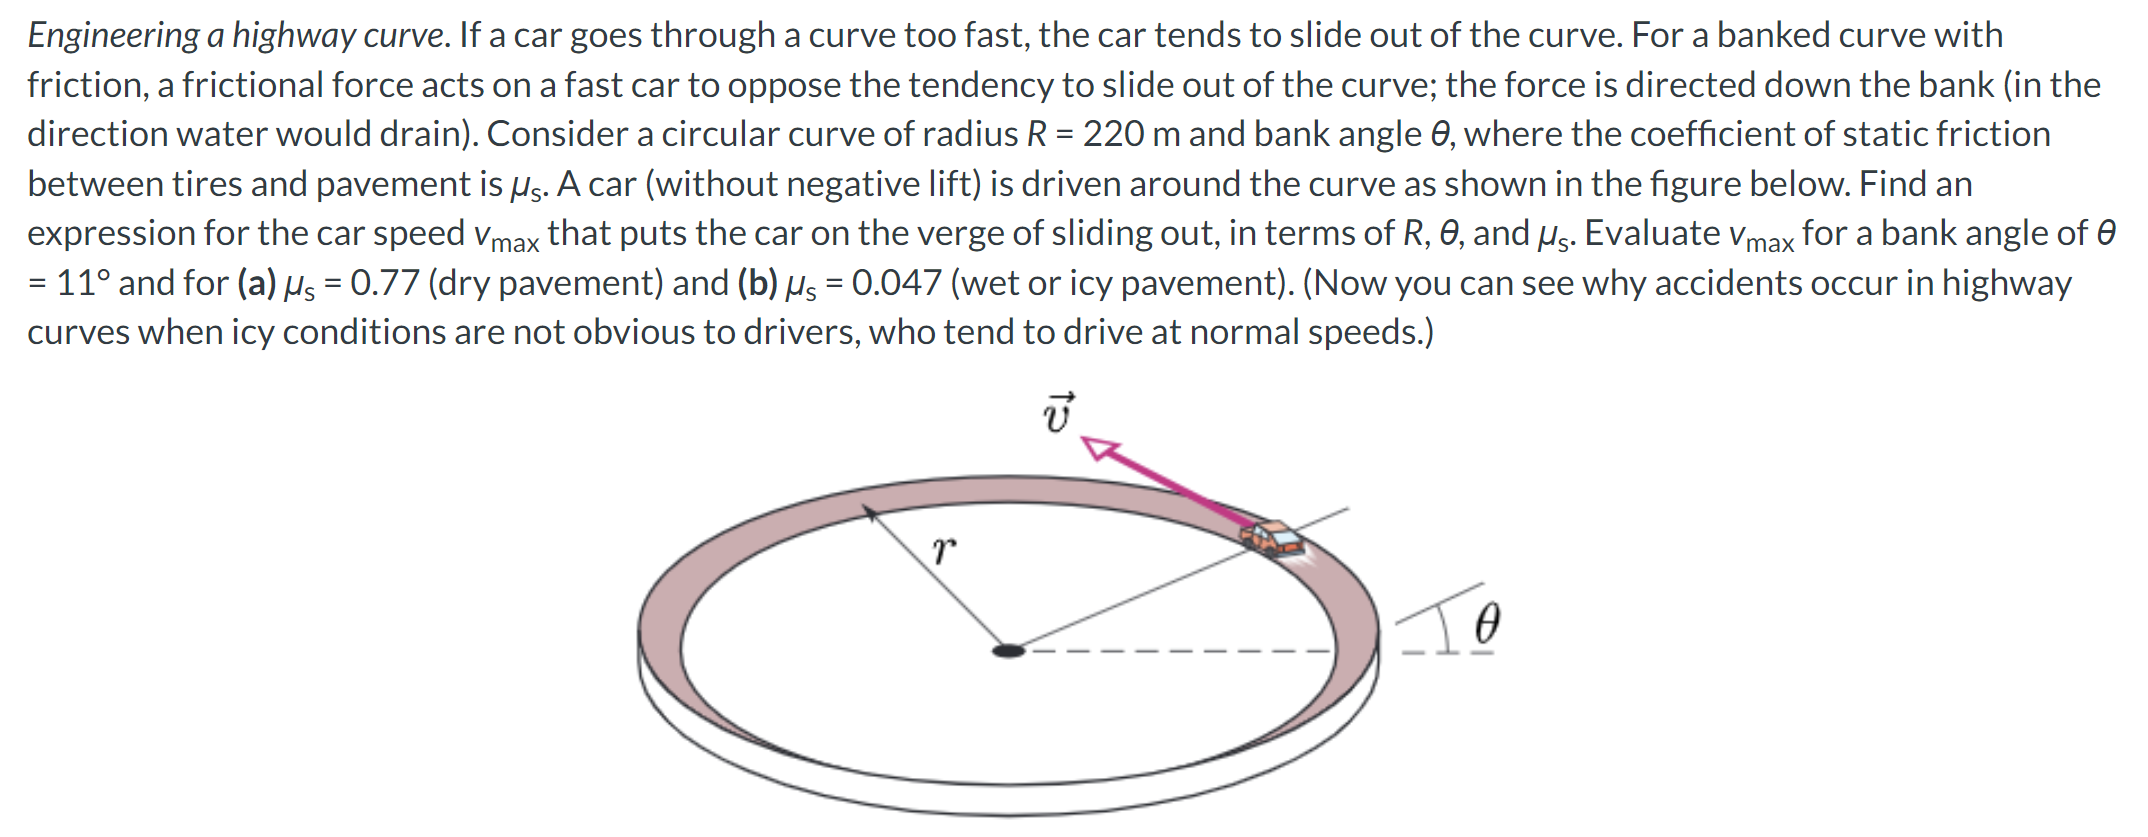 Engineering a highway curve. If a car goes through a curve too fast, the car tends to slide out of the curve. For a banked curve with friction, a frictional force acts on a fast car to oppose the tendency to slide out of the curve; the force is directed down the bank (in the direction water would drain). Consider a circular curve of radius R = 220 m and bank angle θ, where the coefficient of static friction between tires and pavement is μs. A car (without negative lift) is driven around the curve as shown in the figure below. Find an expression for the car speed vmax that puts the car on the verge of sliding out, in terms of R, θ, and μs. Evaluate vmax for a bank angle of θ = 11∘ and for (a) μs = 0.77 (dry pavement) and (b) μs = 0.047 (wet or icy pavement). (Now you can see why accidents occur in highway curves when icy conditions are not obvious to drivers, who tend to drive at normal speeds.)